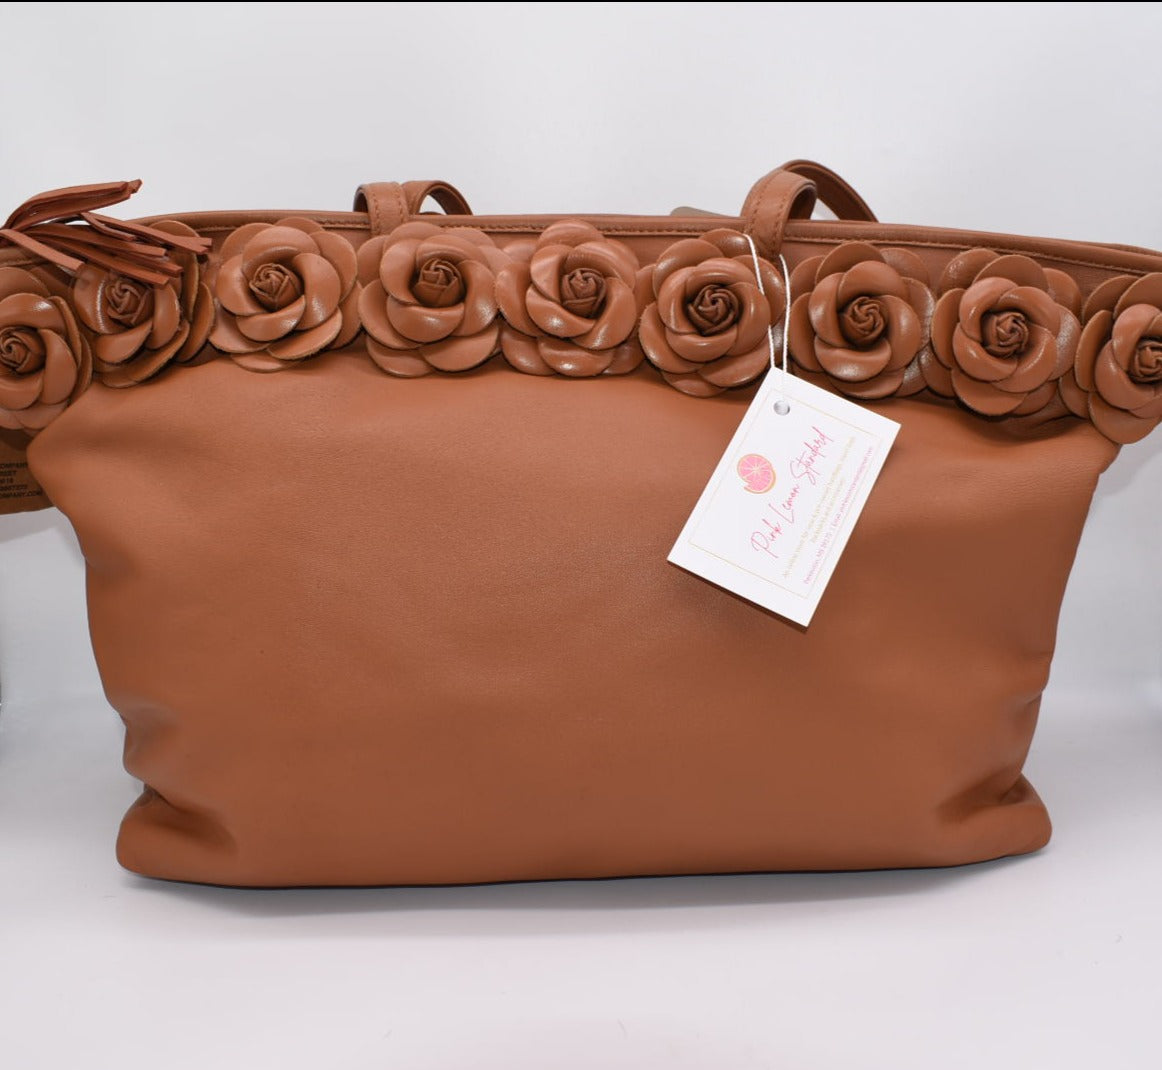 Clever Carriage Company Handcrafted Leather Rose Tote Bag in Tan